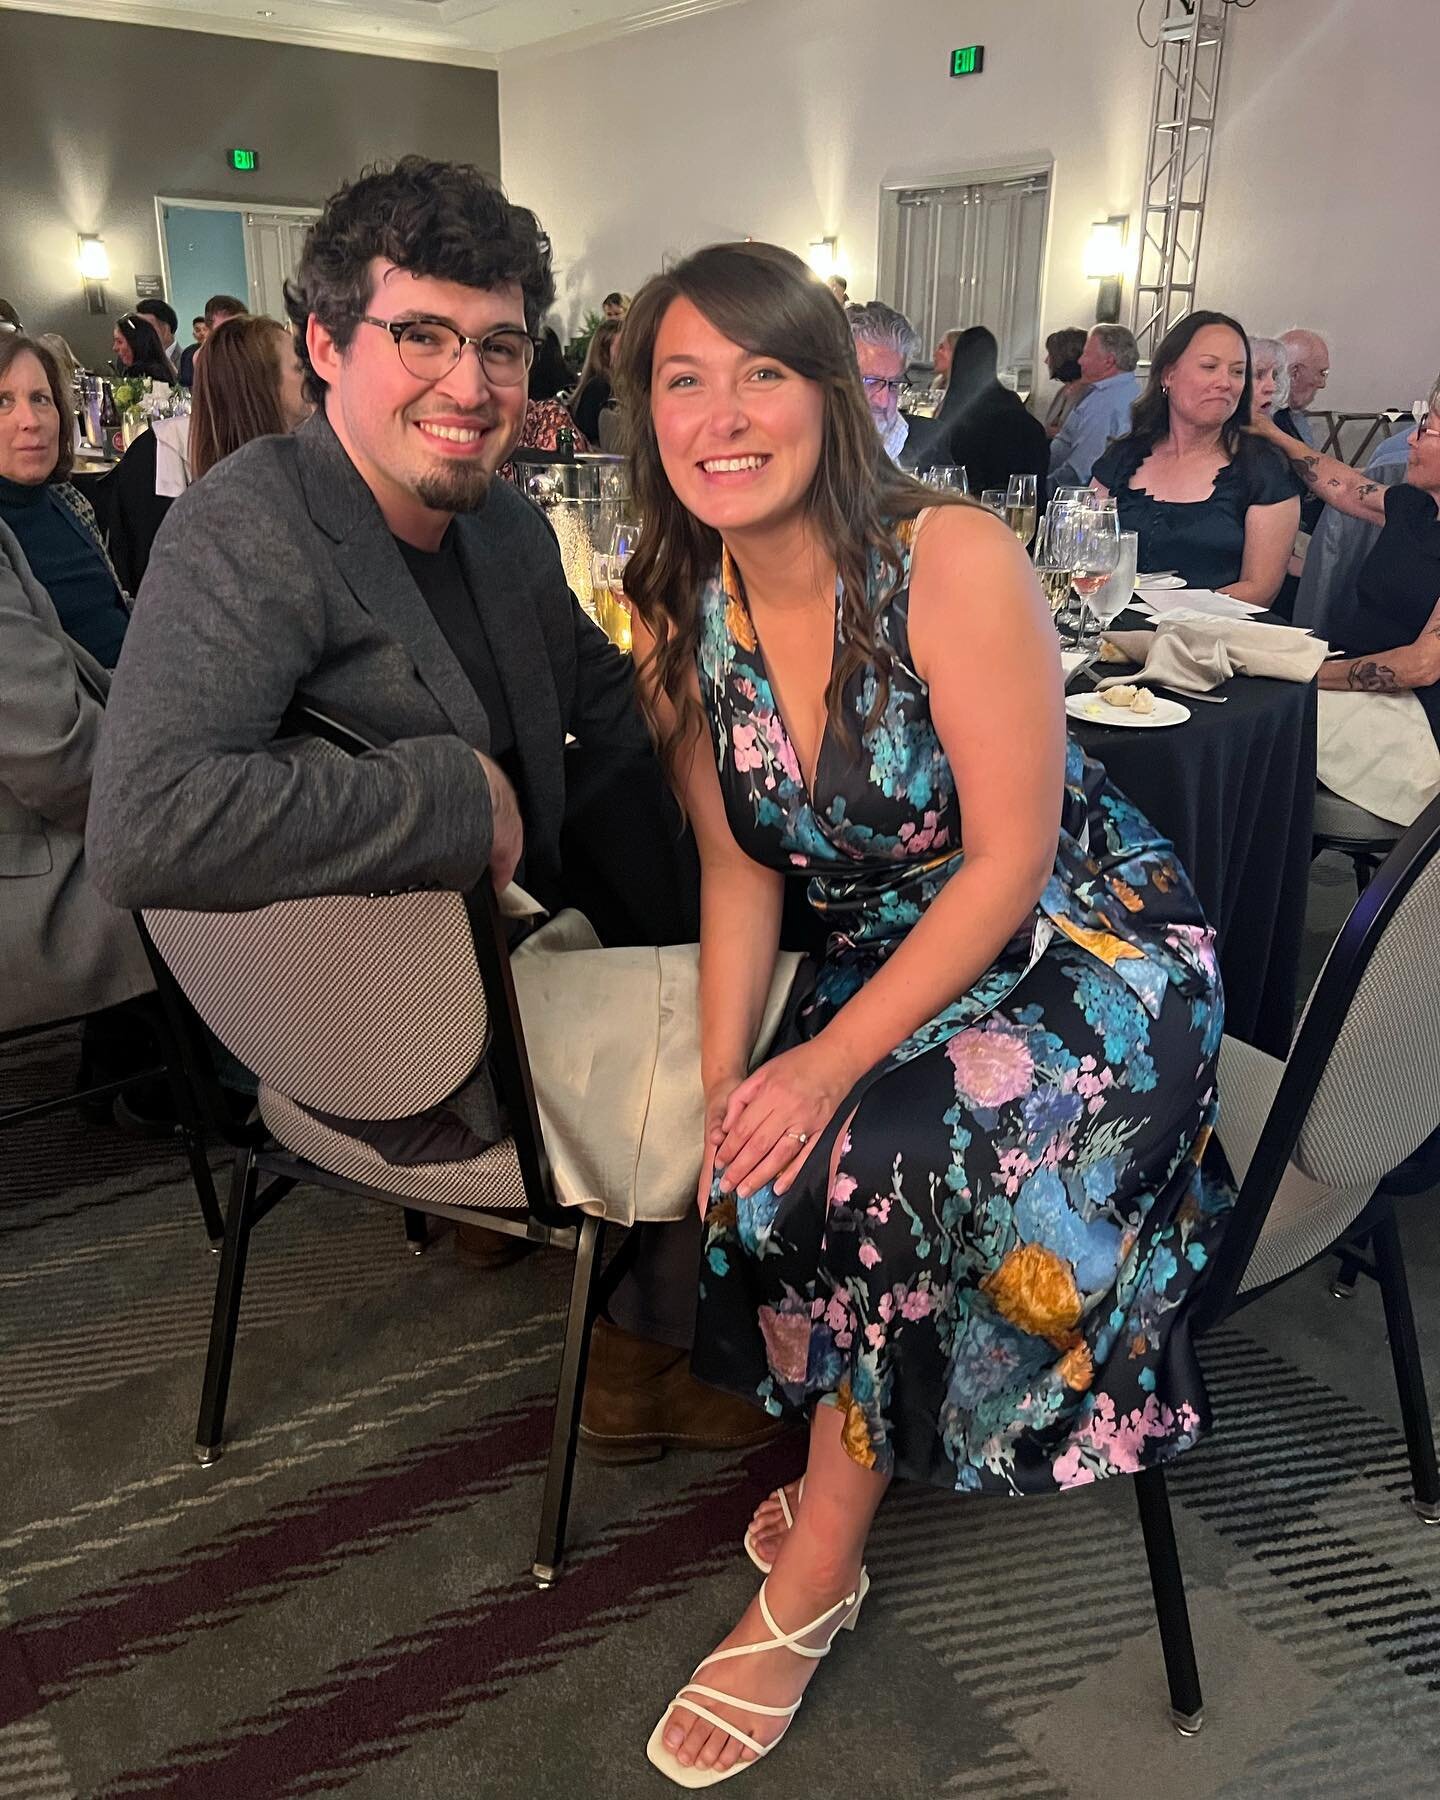 Such an inspiring evening attending the #SonomaCounty Stars of the Industry Gala last night. We were humbled to to be recognized as a finalist in the Innovation category &mdash; amongst such incredible company! Although we didn&rsquo;t win, we got to